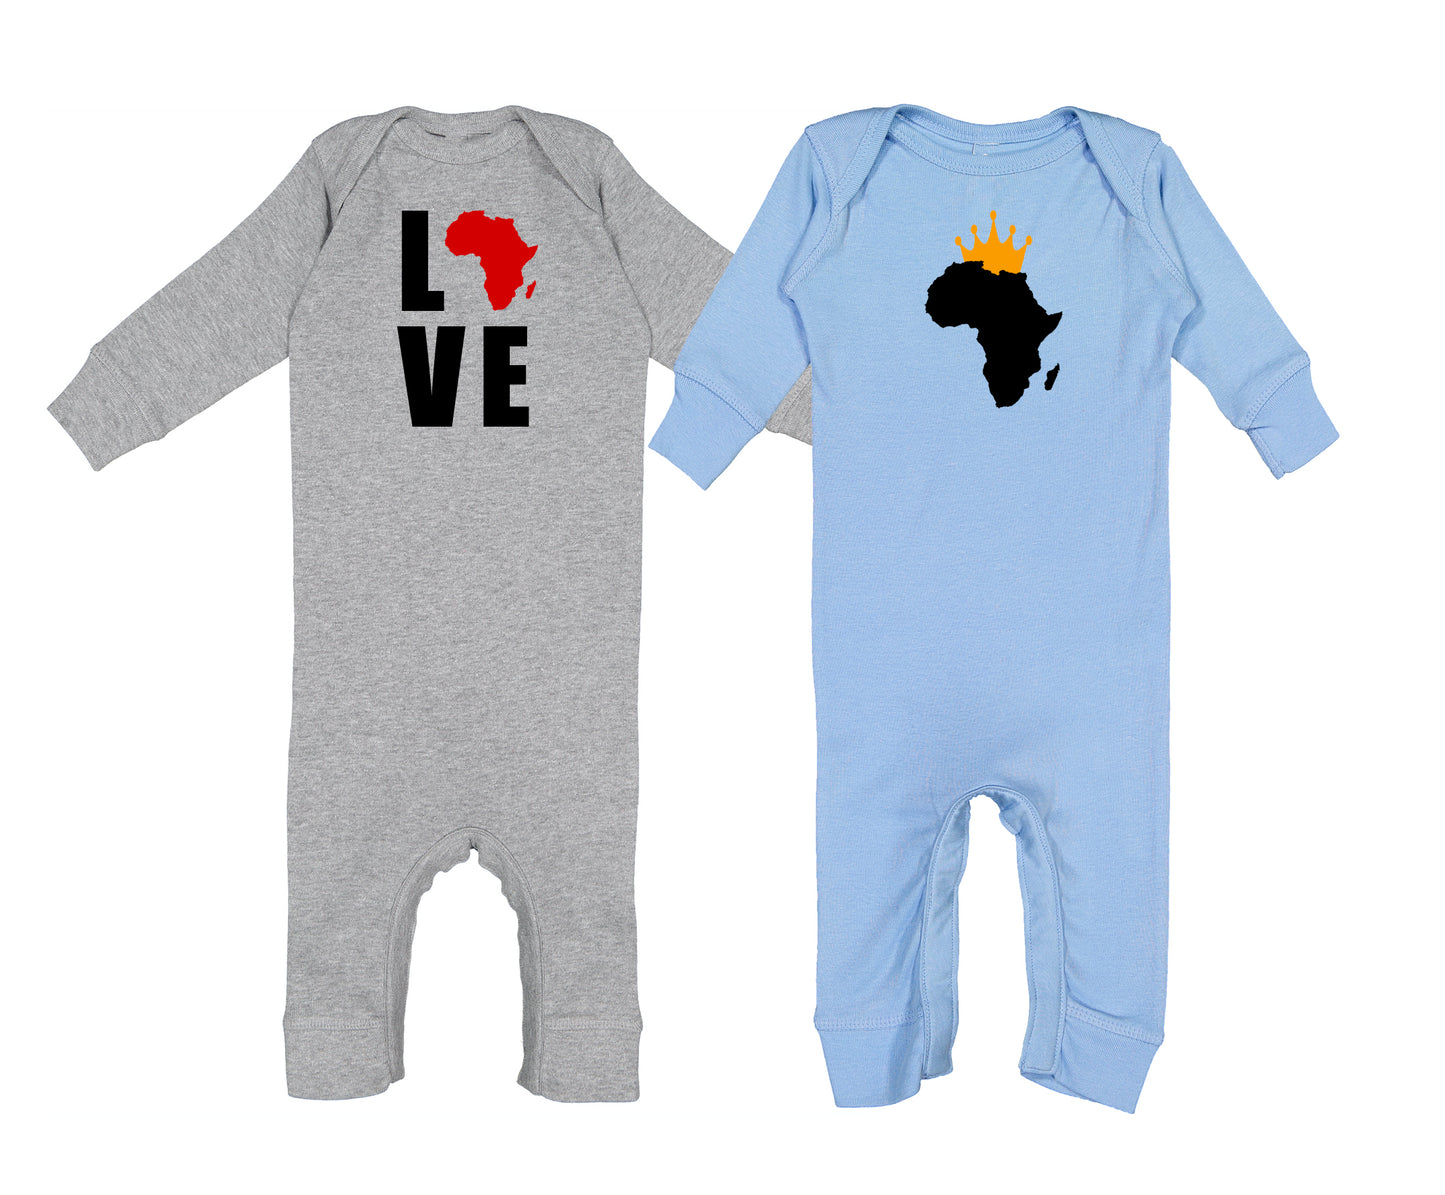 One-Piece Set for Baby